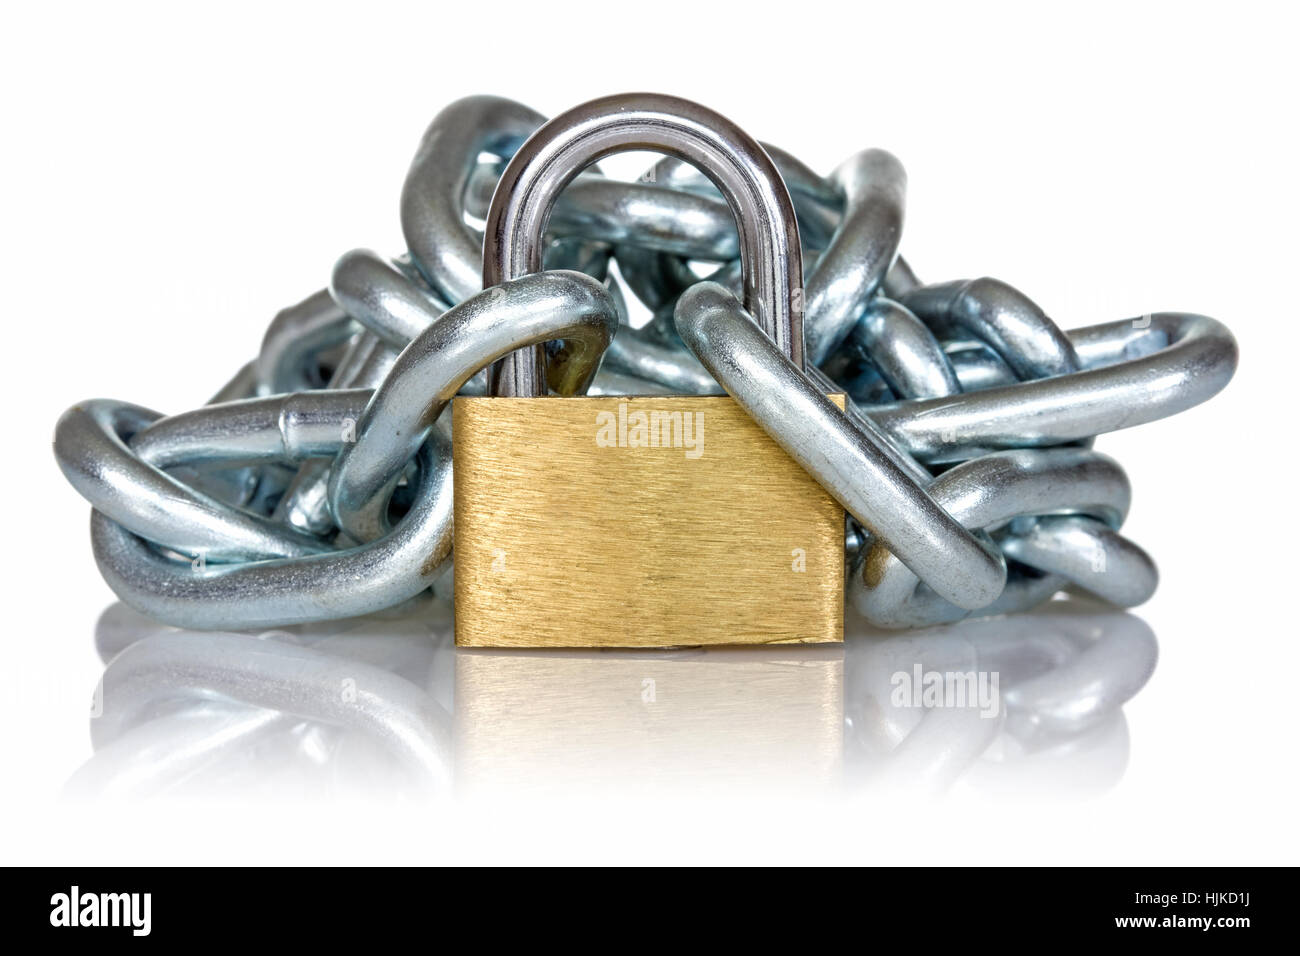 lock, chain, metal, protect, protection, abstract, security, safety, lock, Stock Photo